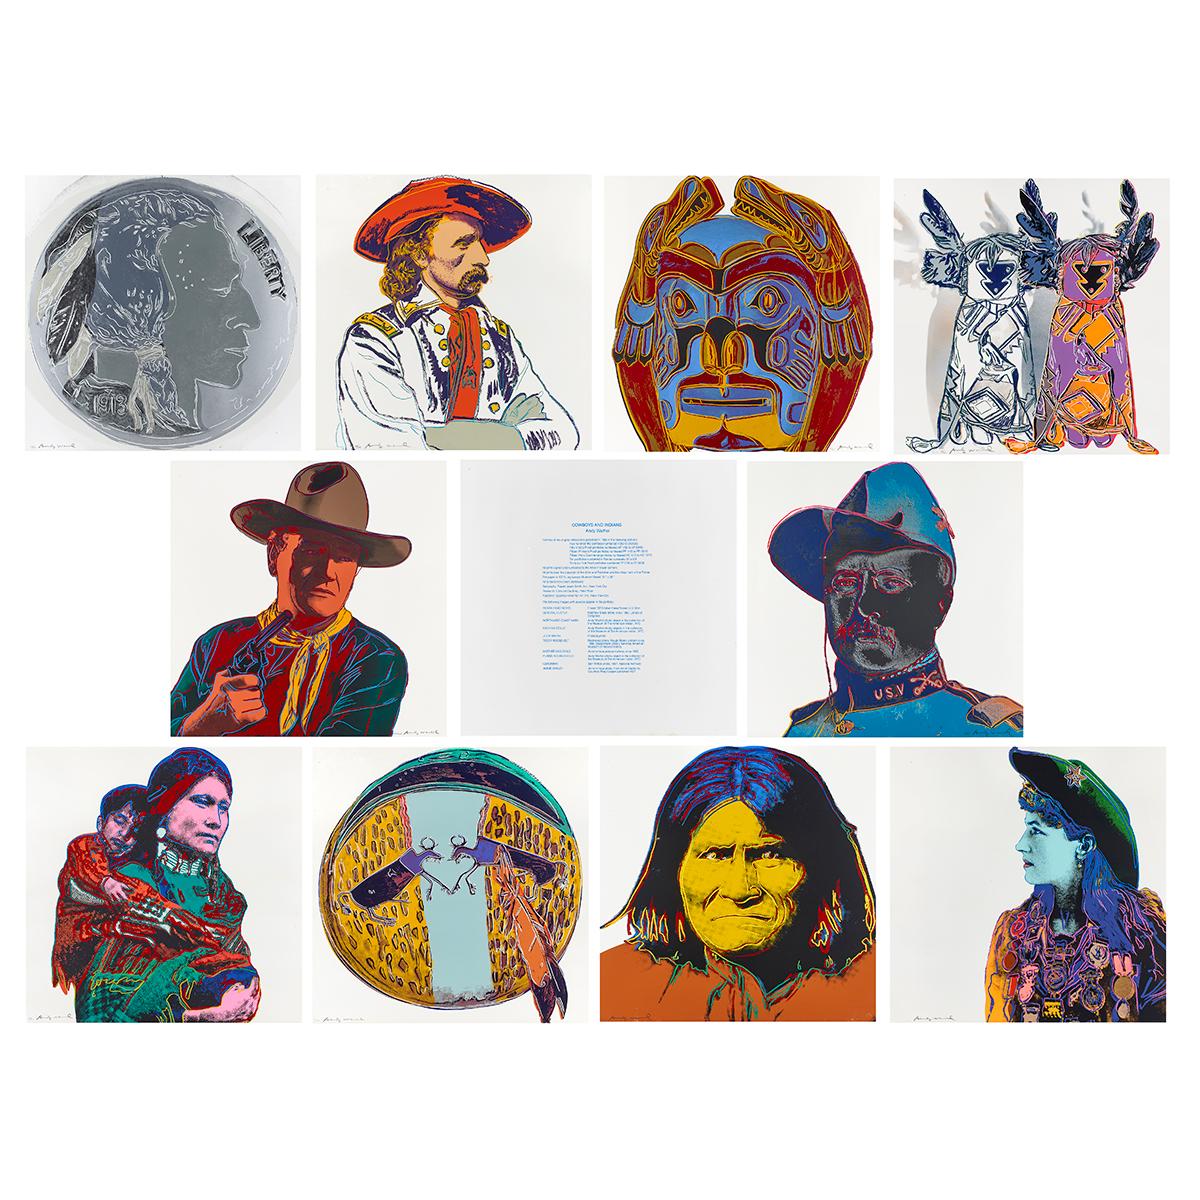 Andy Warhol Figurative Print - Cowboys and Indians (Portfolio of 10)